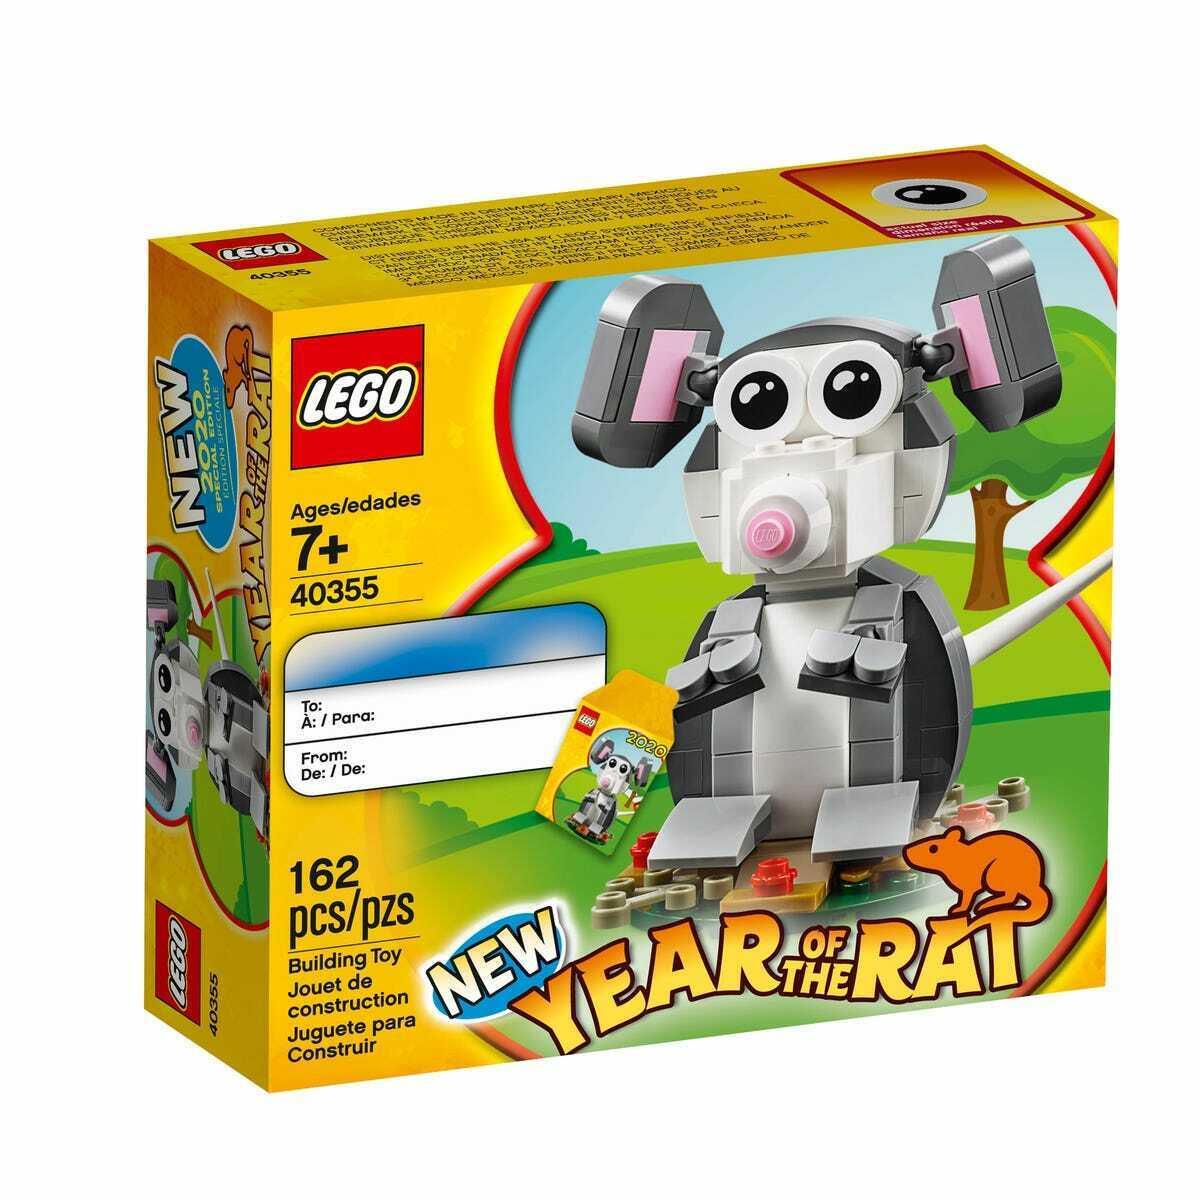 Lego 40355 Year of The Rat Limited Edition Set 167 Pcs